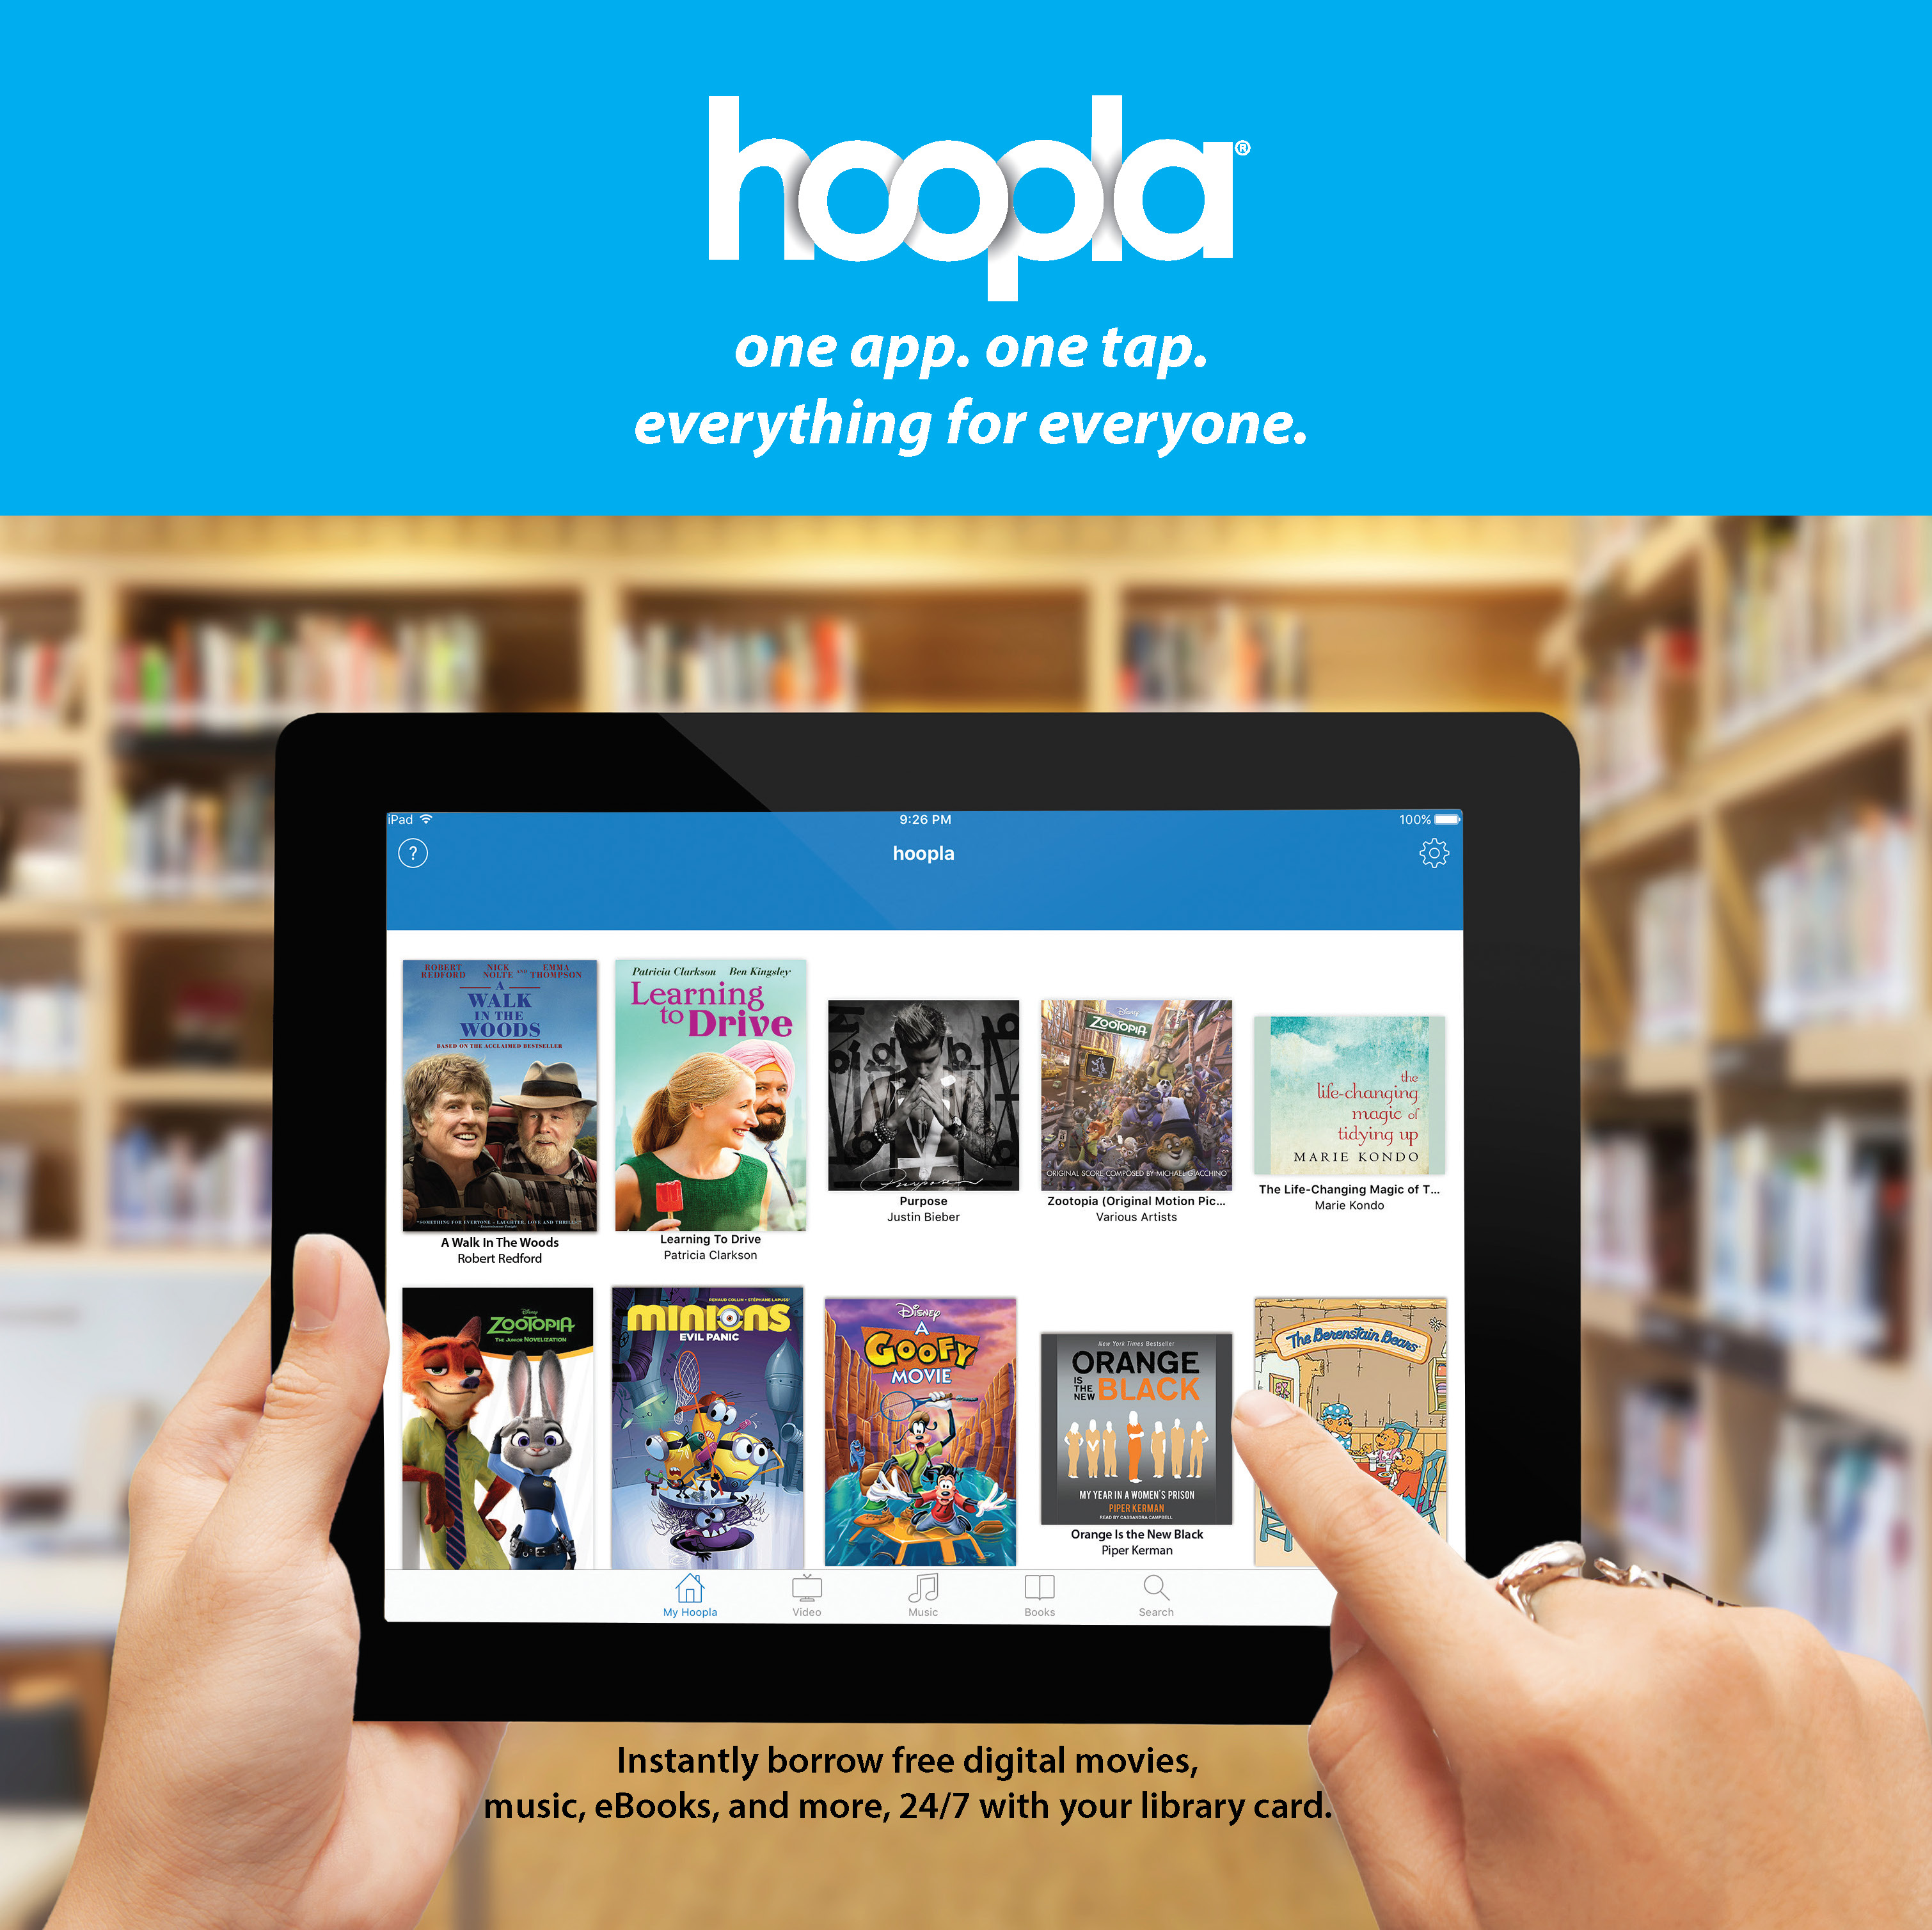 Hoopla: One app, one tap. Everything for everyone. Instantly borrow videos, music, comics, ebooks and e-audiobooks